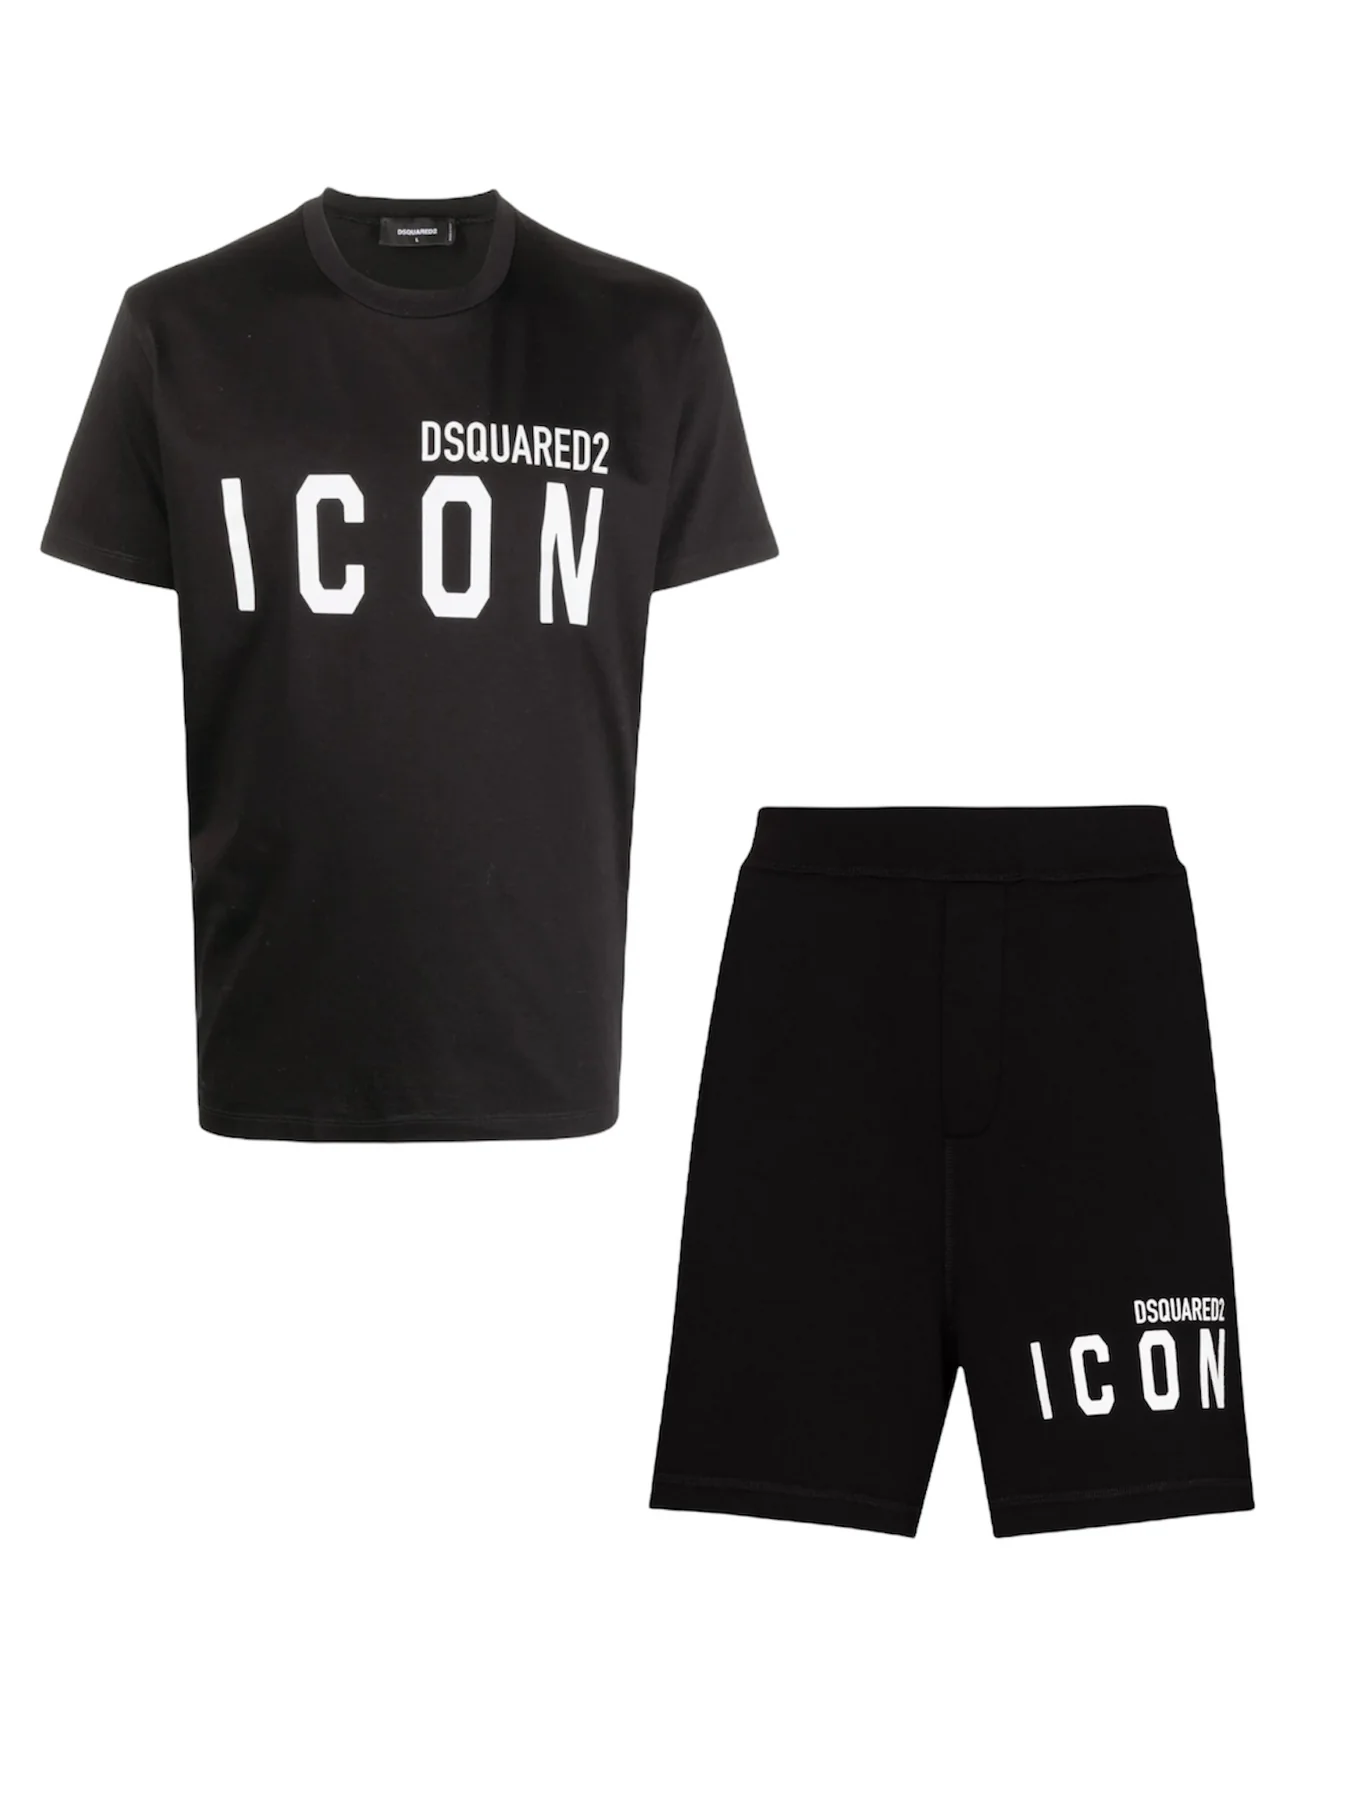 Dsquared2 Icon T-Shirt & Shorts Set in Black